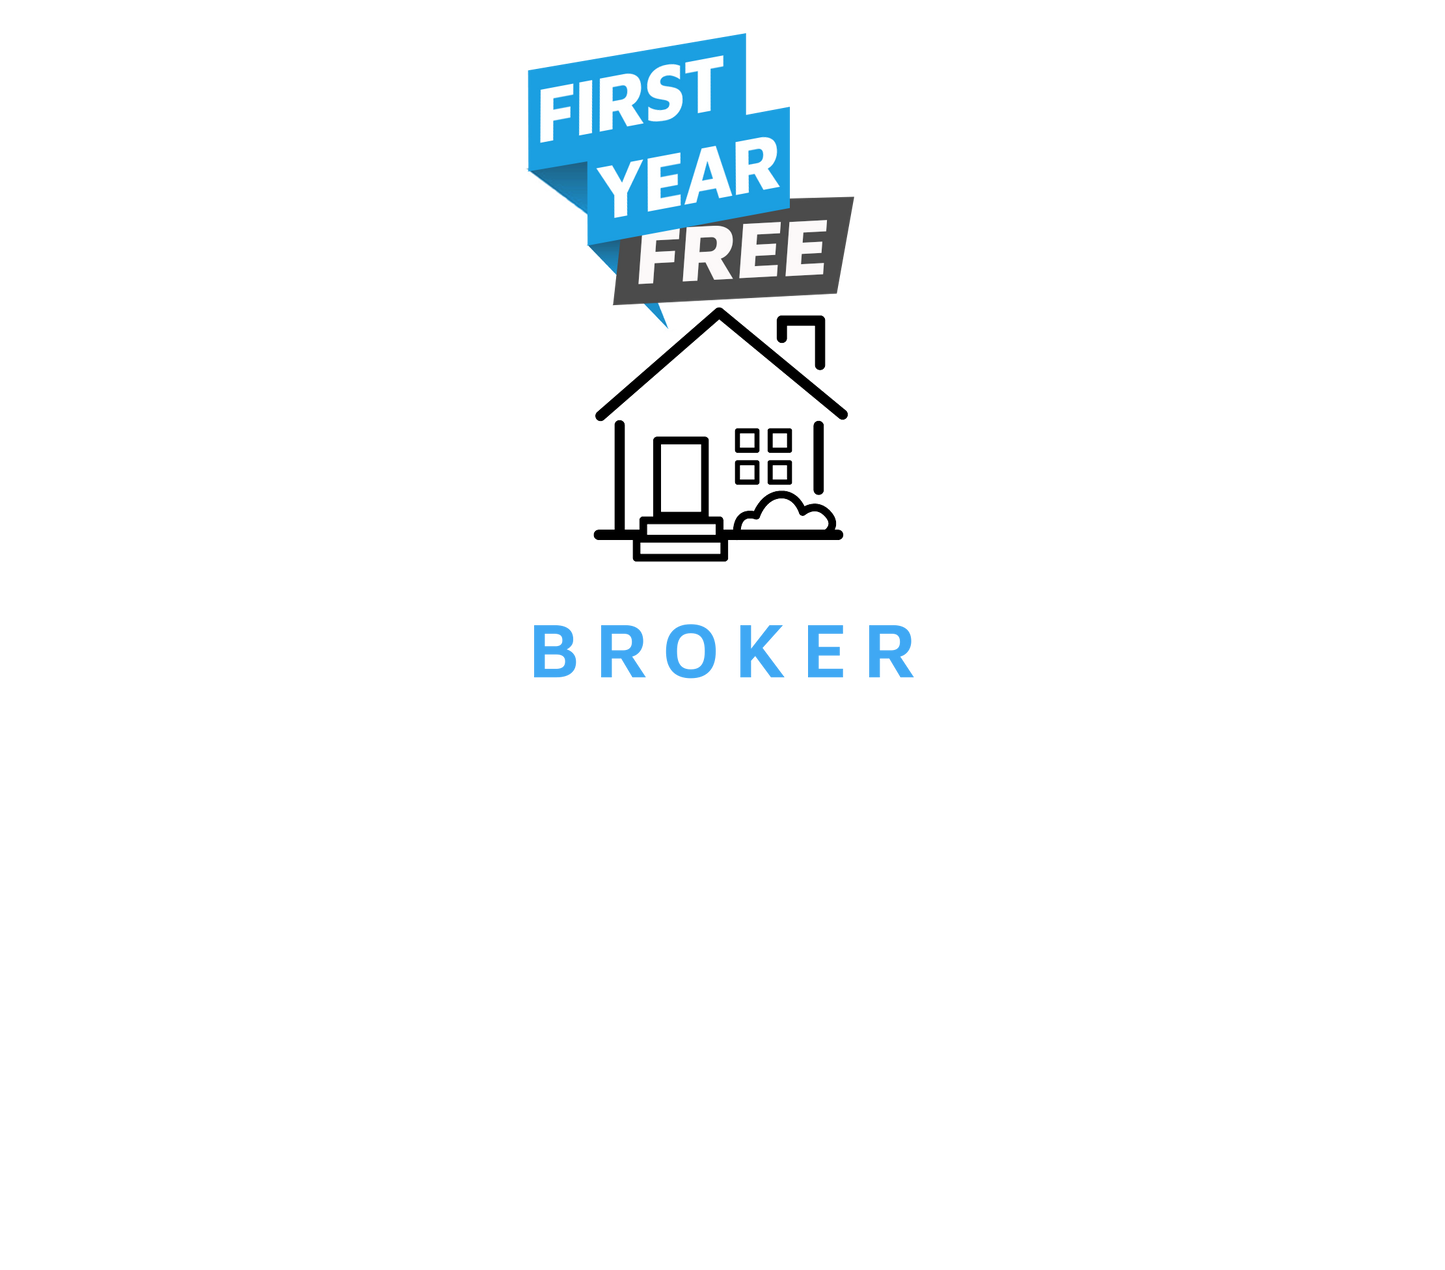 FREE FIRST YEAR - Broker - use code T329